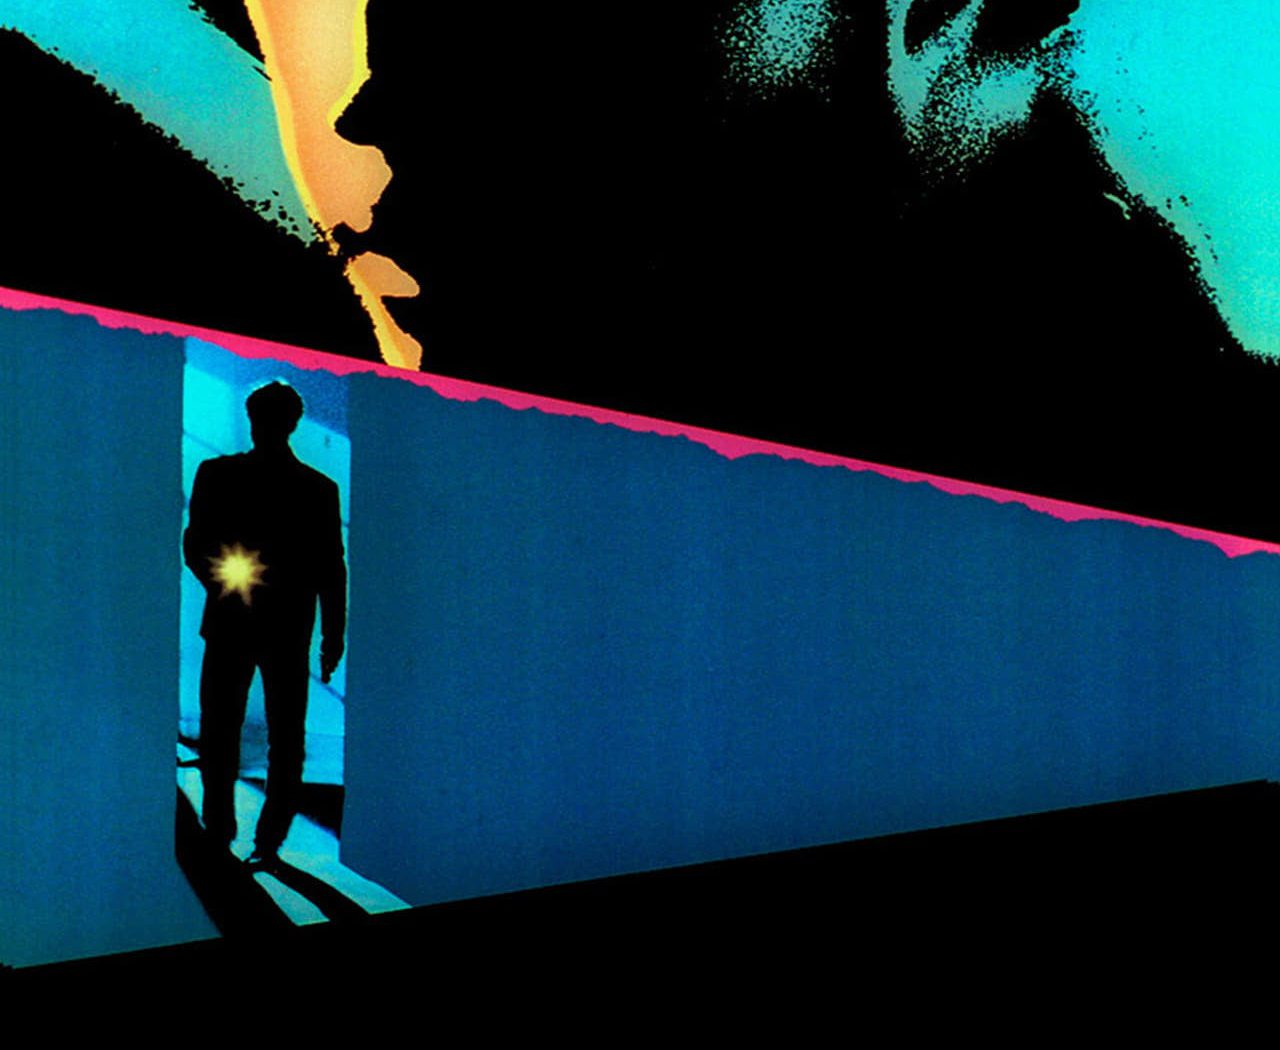 Poster for the movie "Manhunter"